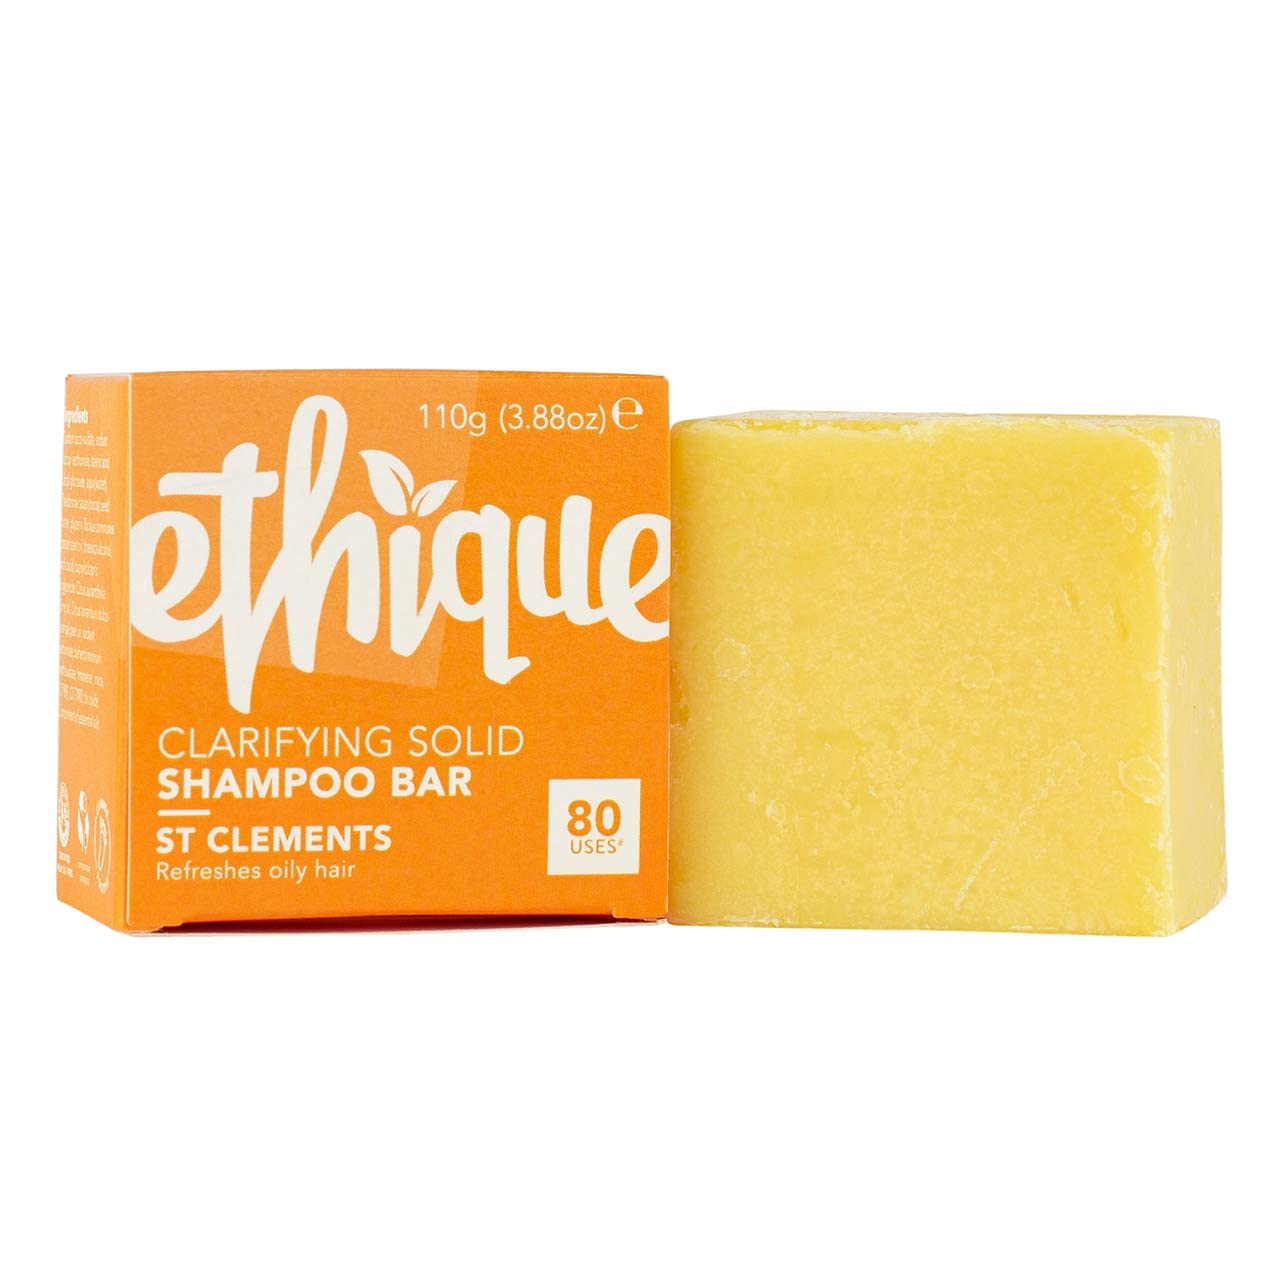 Ethique St Clements -Clarifying Solid Shampoo Bar for [...]